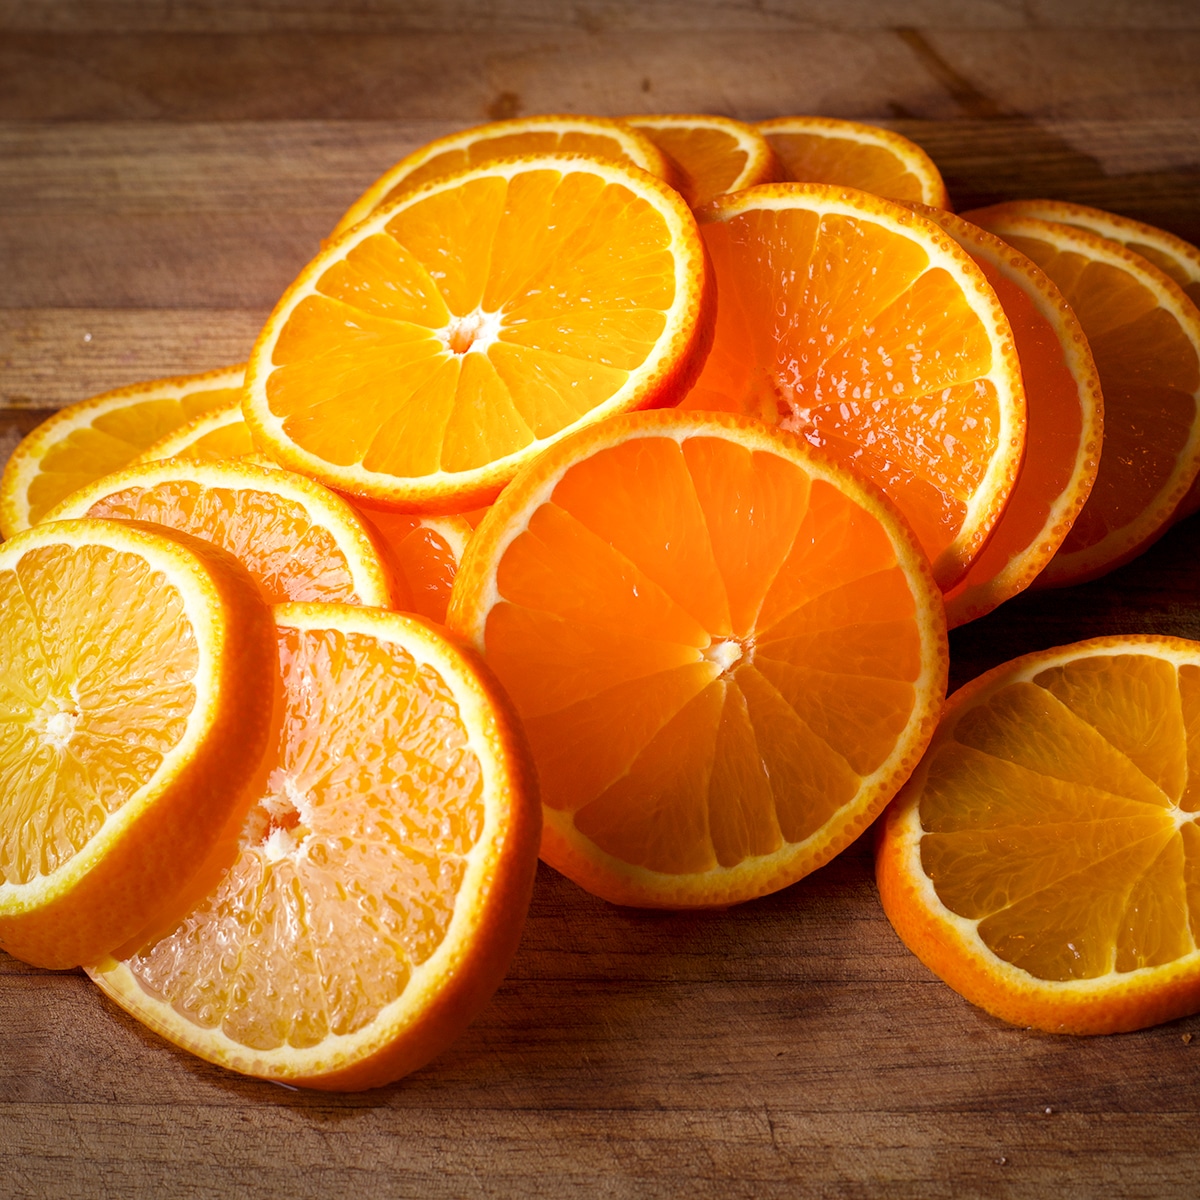 Slices of orange on a wood cutting board.